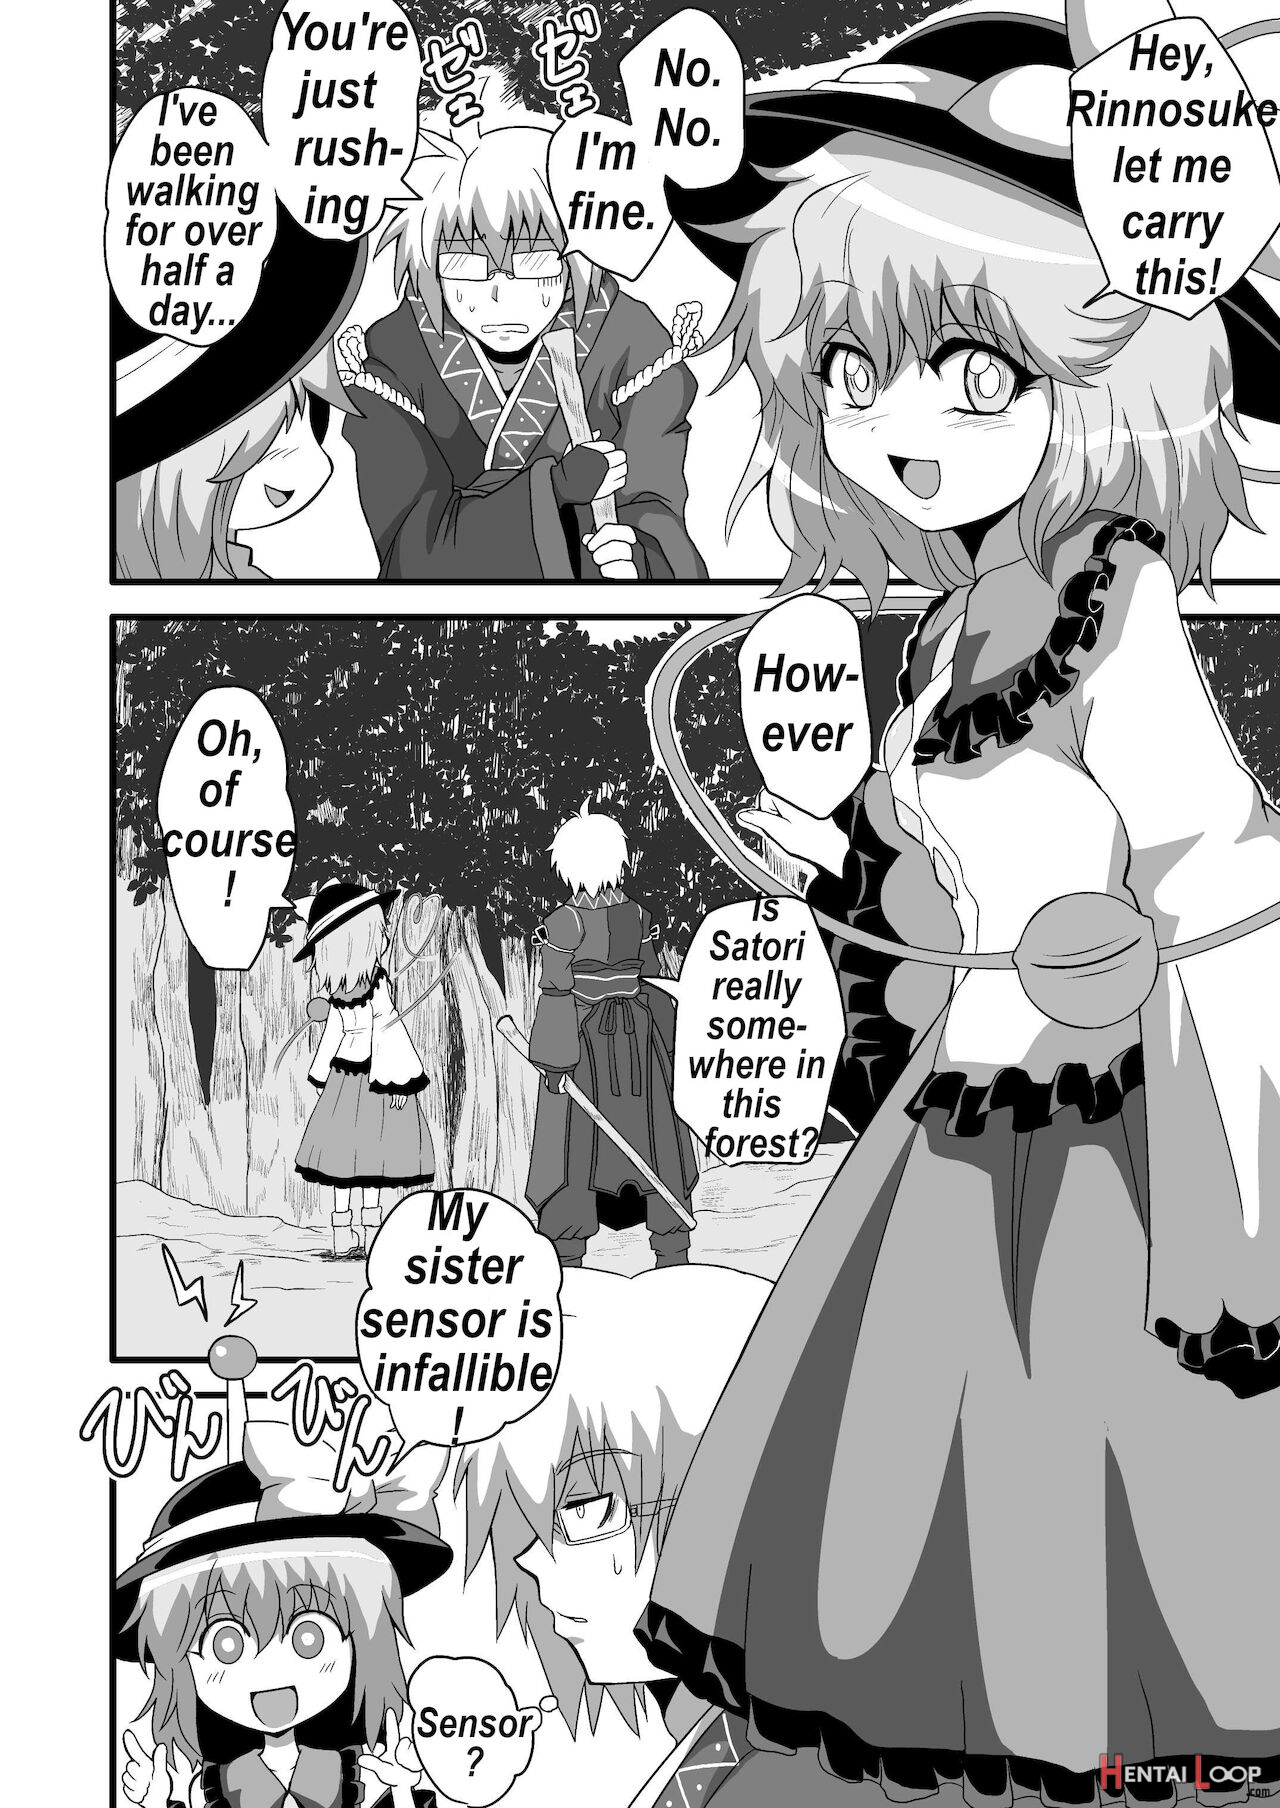 Marisa's Thrill - Take Care Of Yourself - 通り魔理沙にきをつけろ - Part 4 page 3